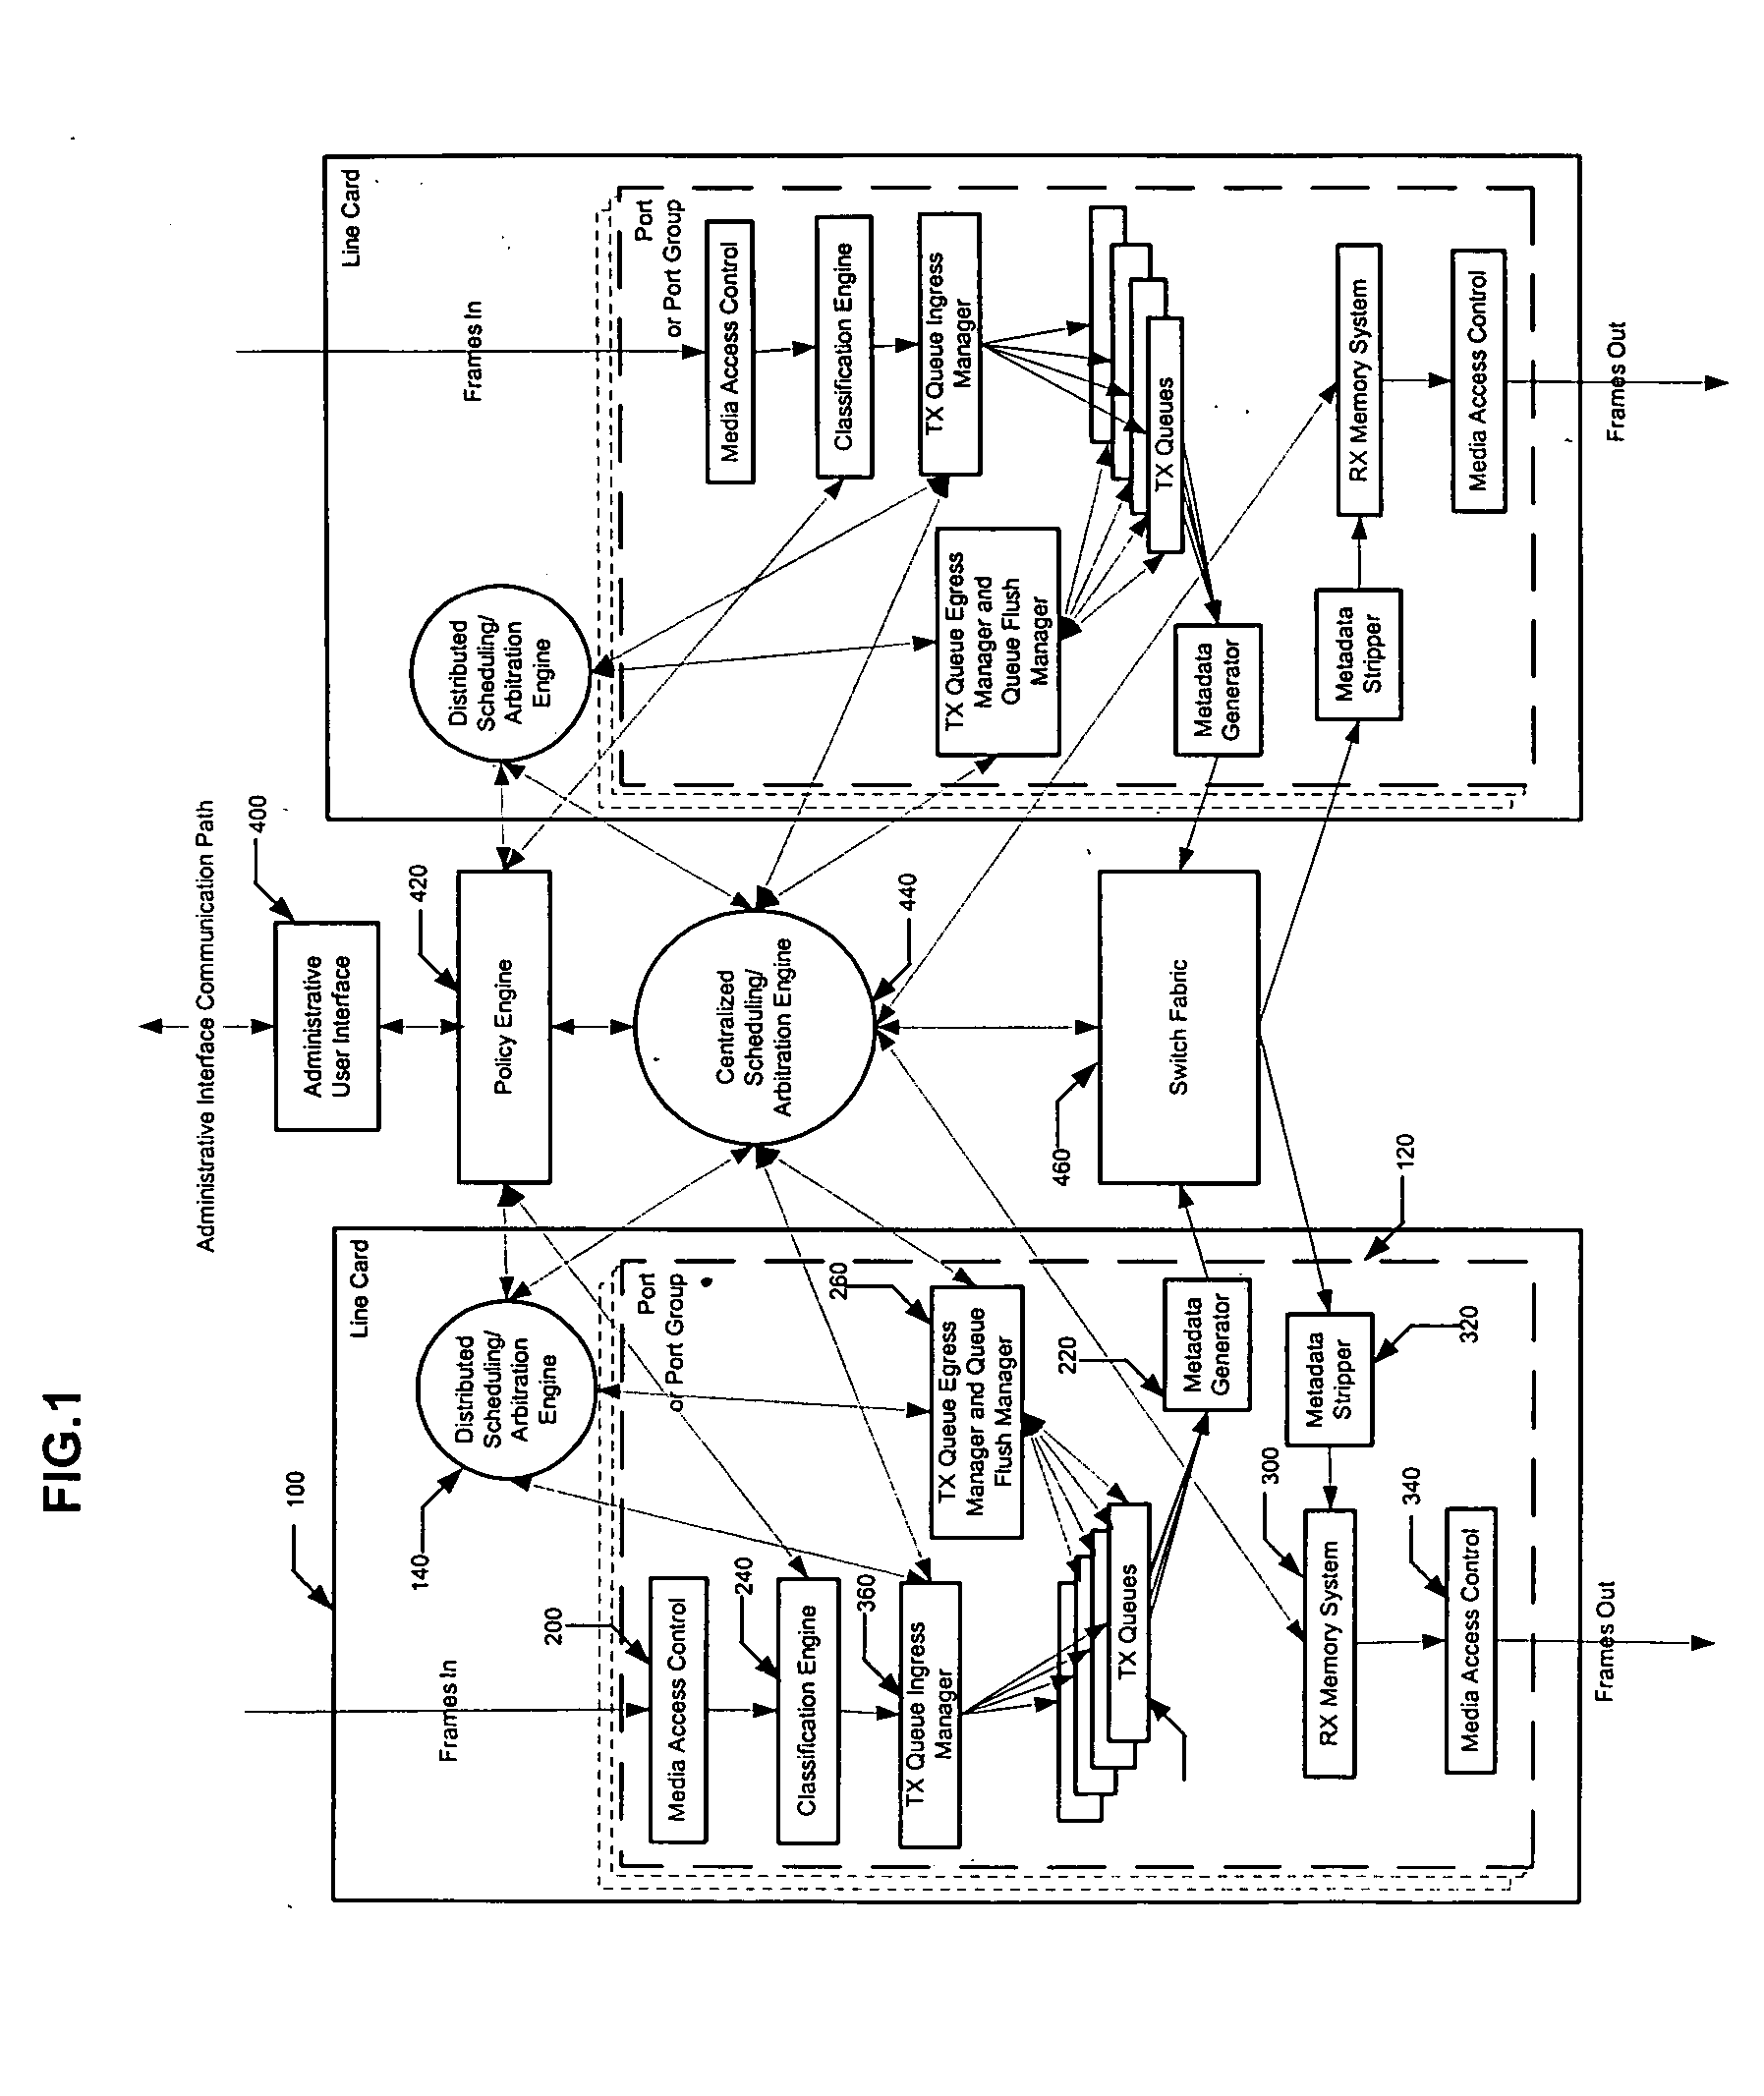 Methods and apparatus for provisioning connection oriented, quality of service capabilities and services